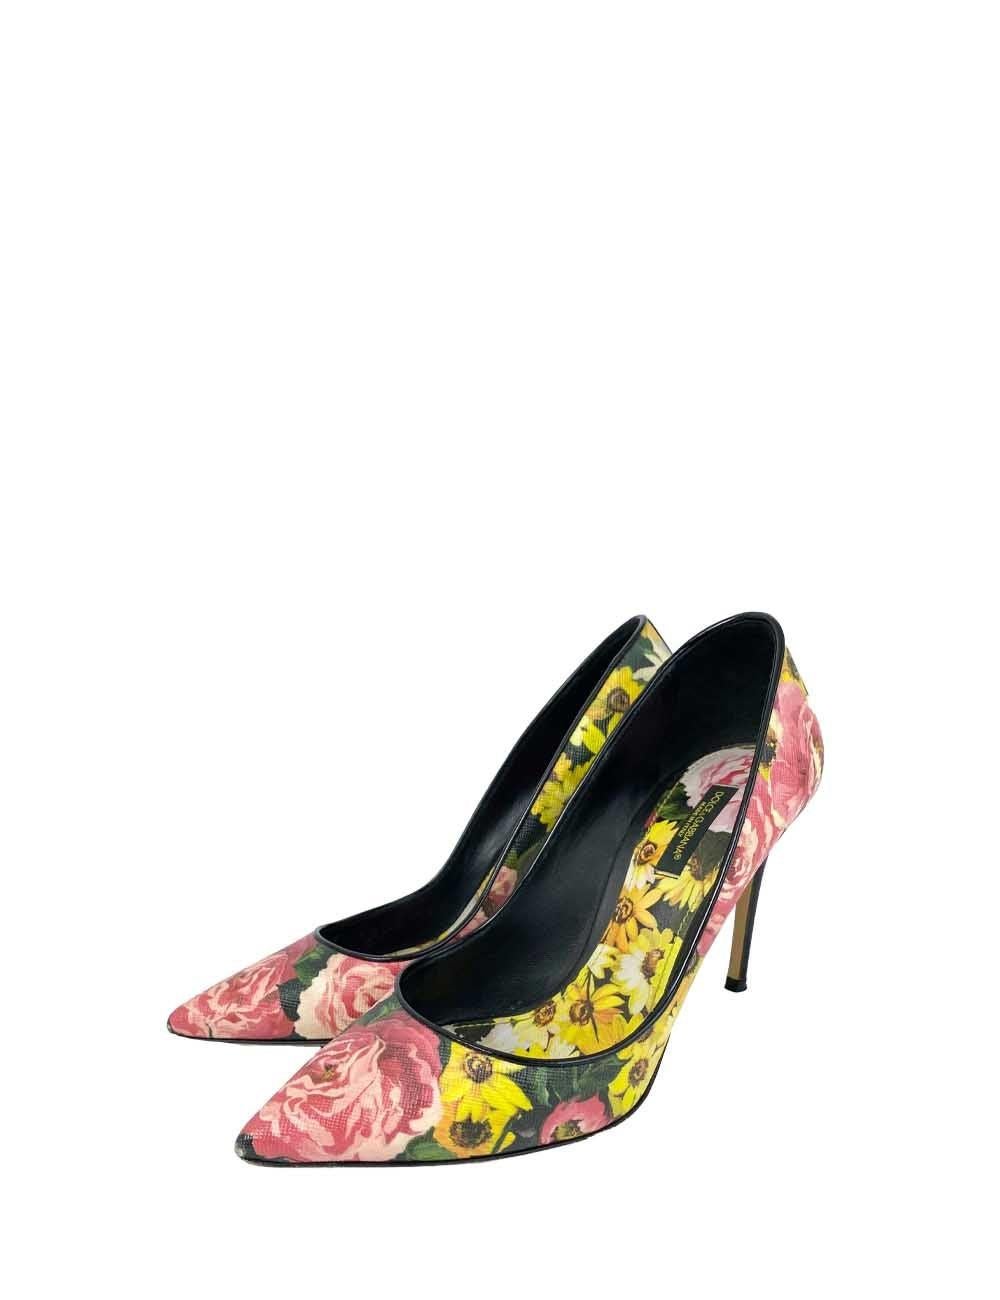 Dolce & Gabbana EU 37 Multicolor Floral Pointed-Toe Pumps In Excellent Condition For Sale In Amman, JO